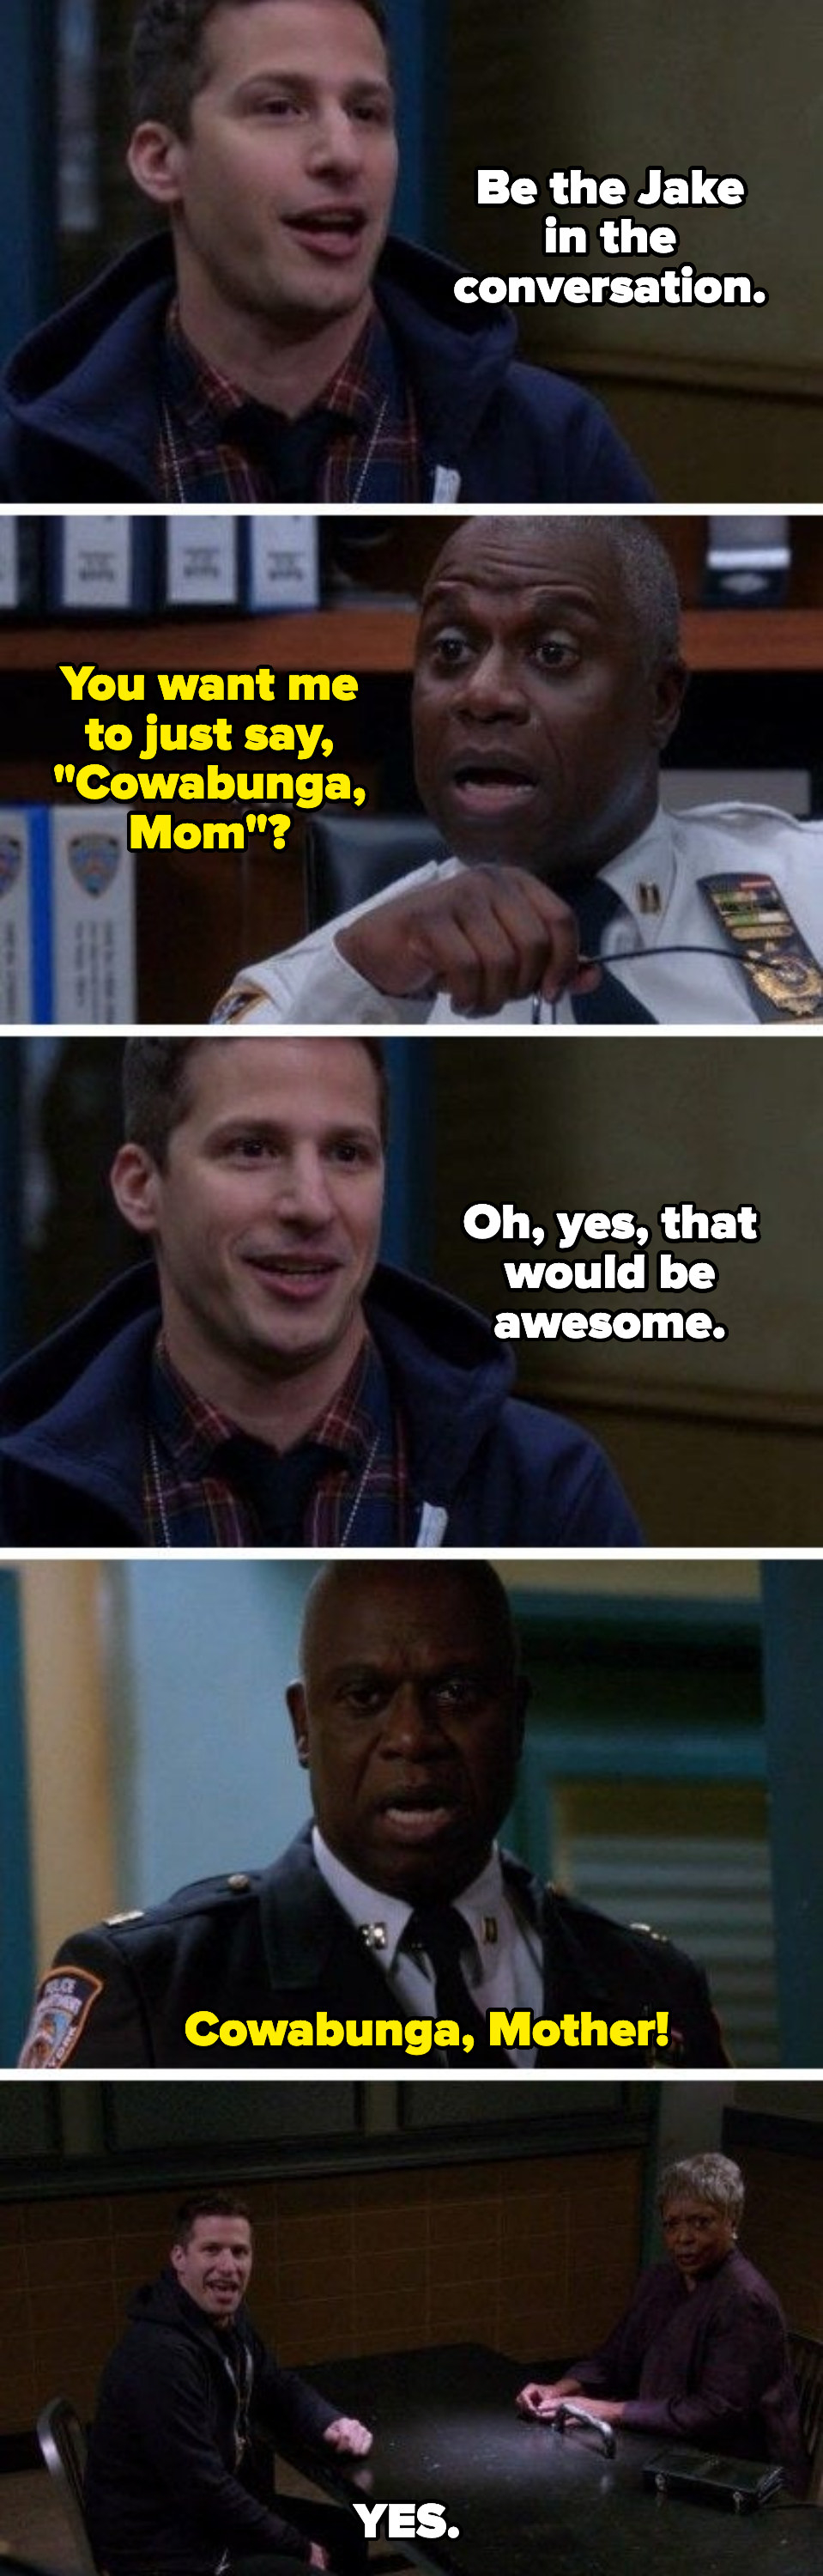 Captain Holt: &quot;You want me to just say, &#x27;Cowabunga, Mom?&#x27; Jake: &quot;Oh, yes, that would be awesome&quot;